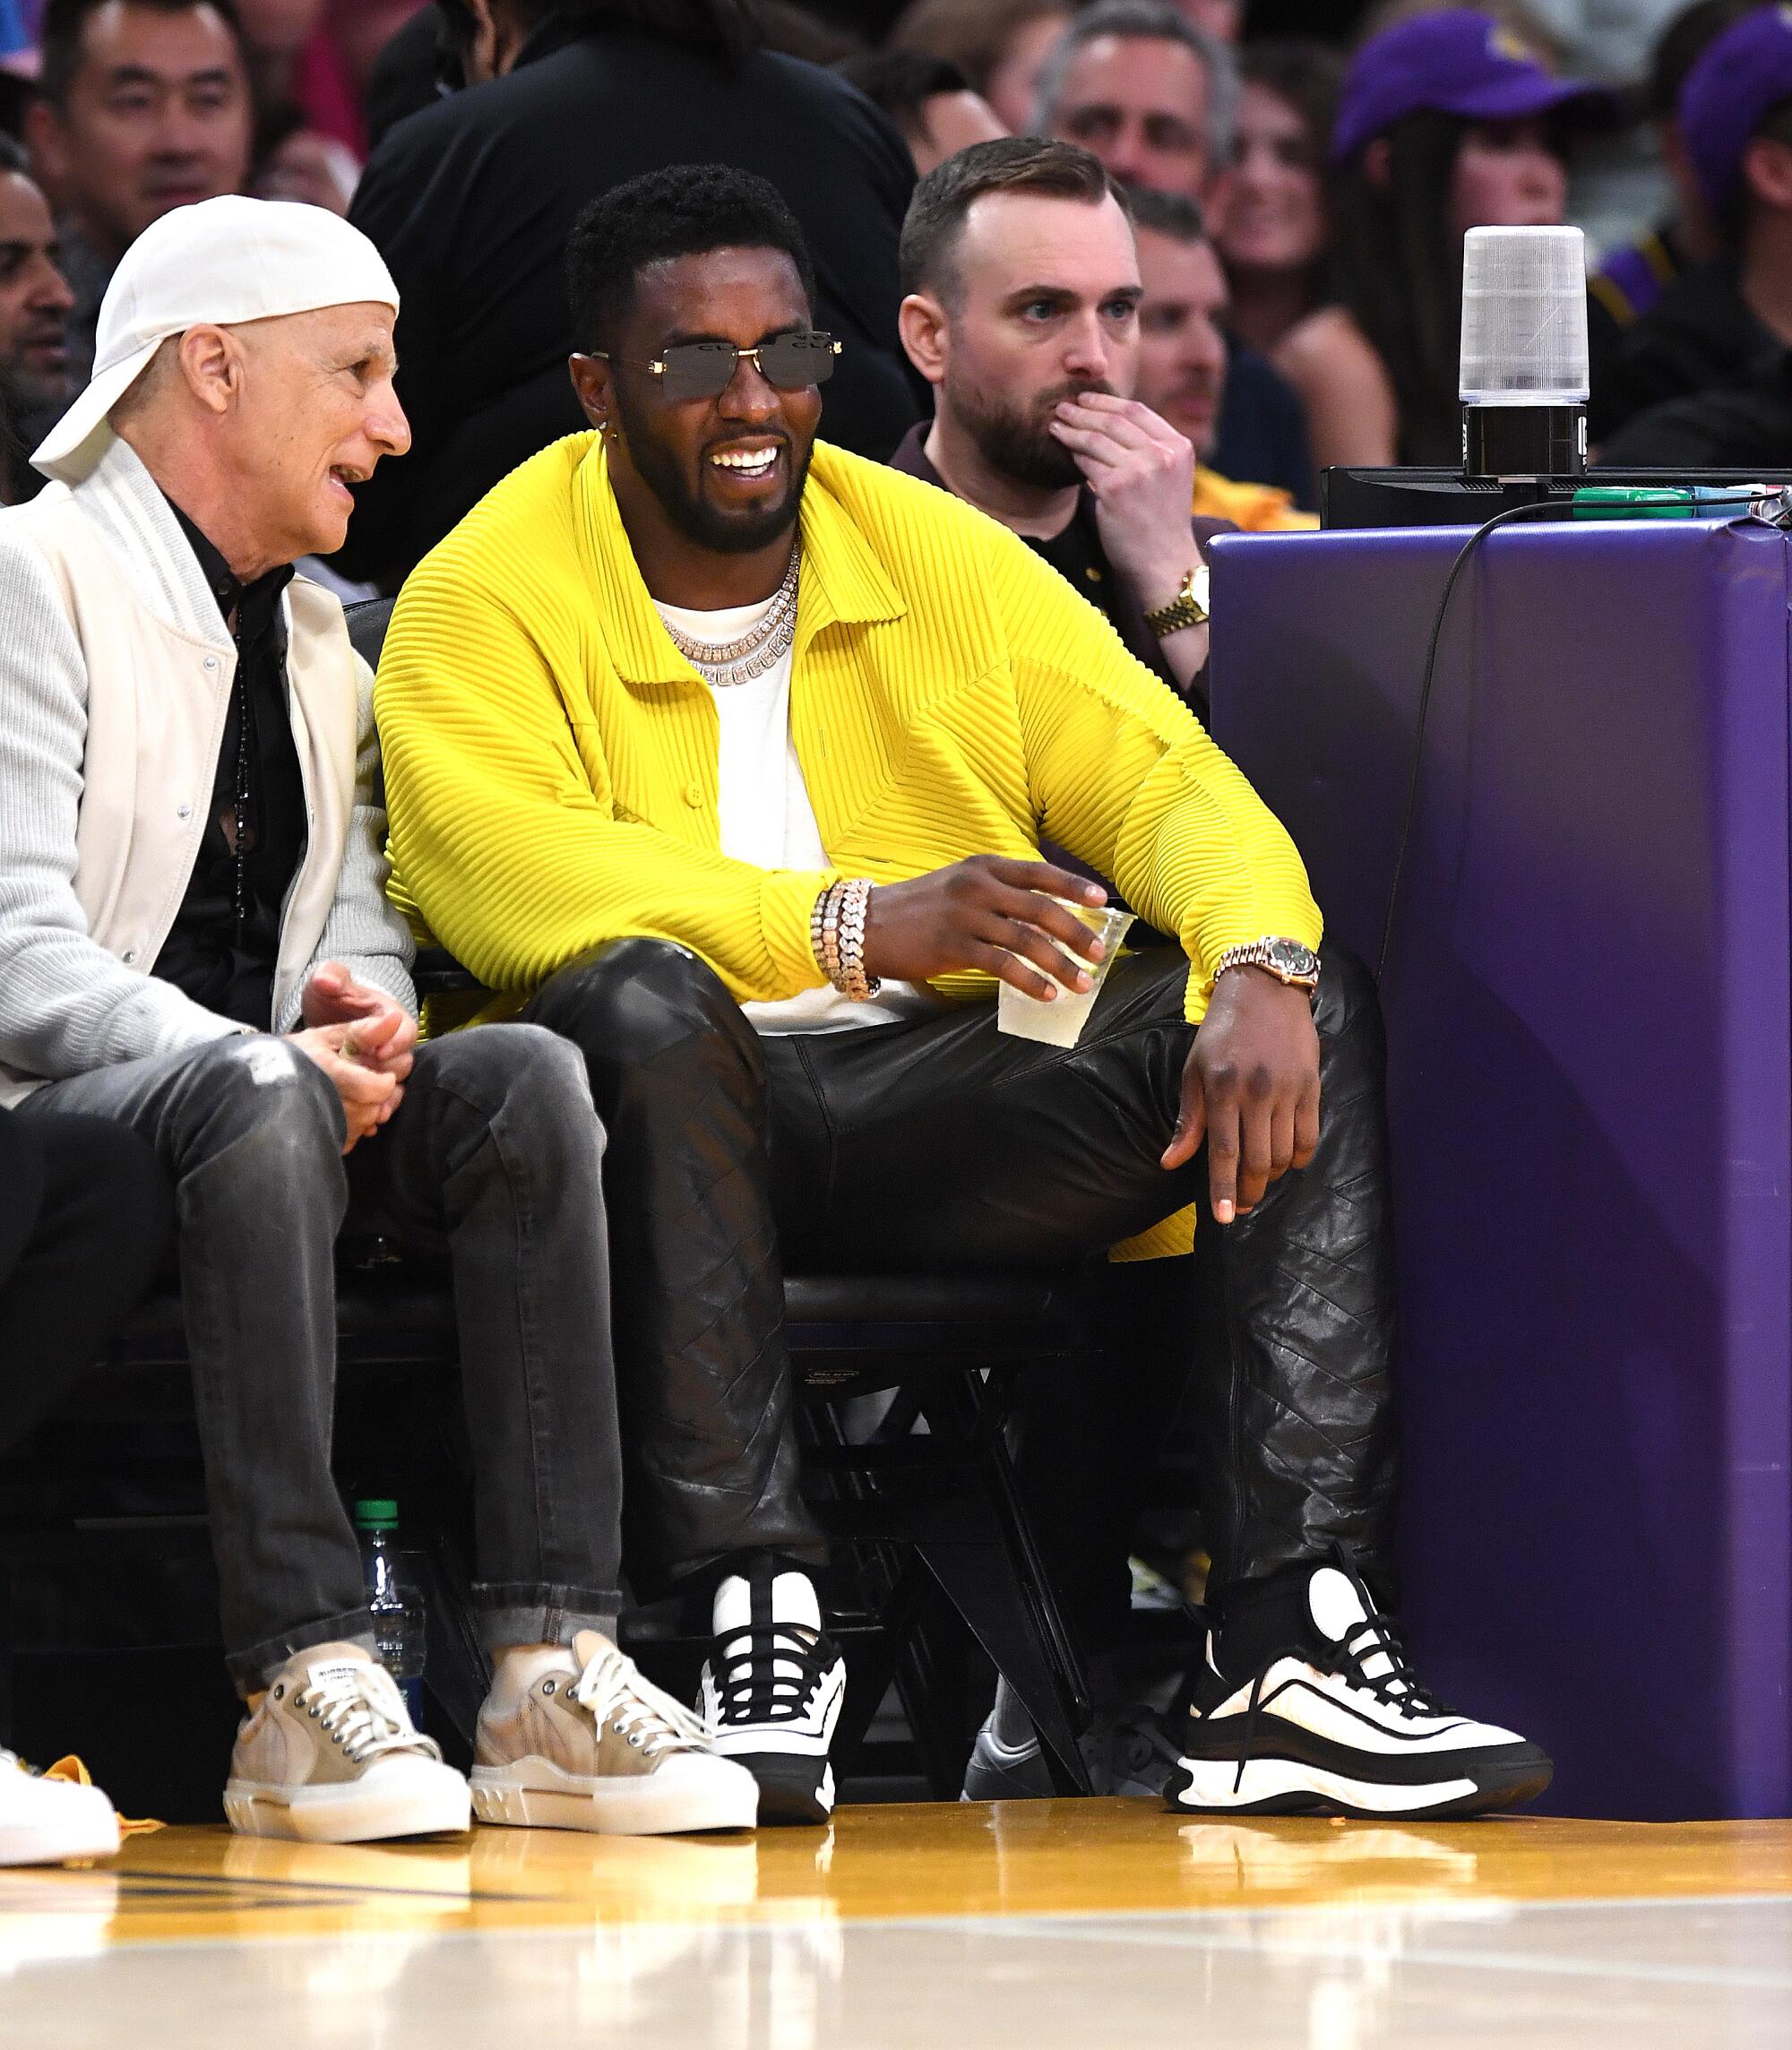 Rapper Sean 'Diddy' Combs attends a basketball game.